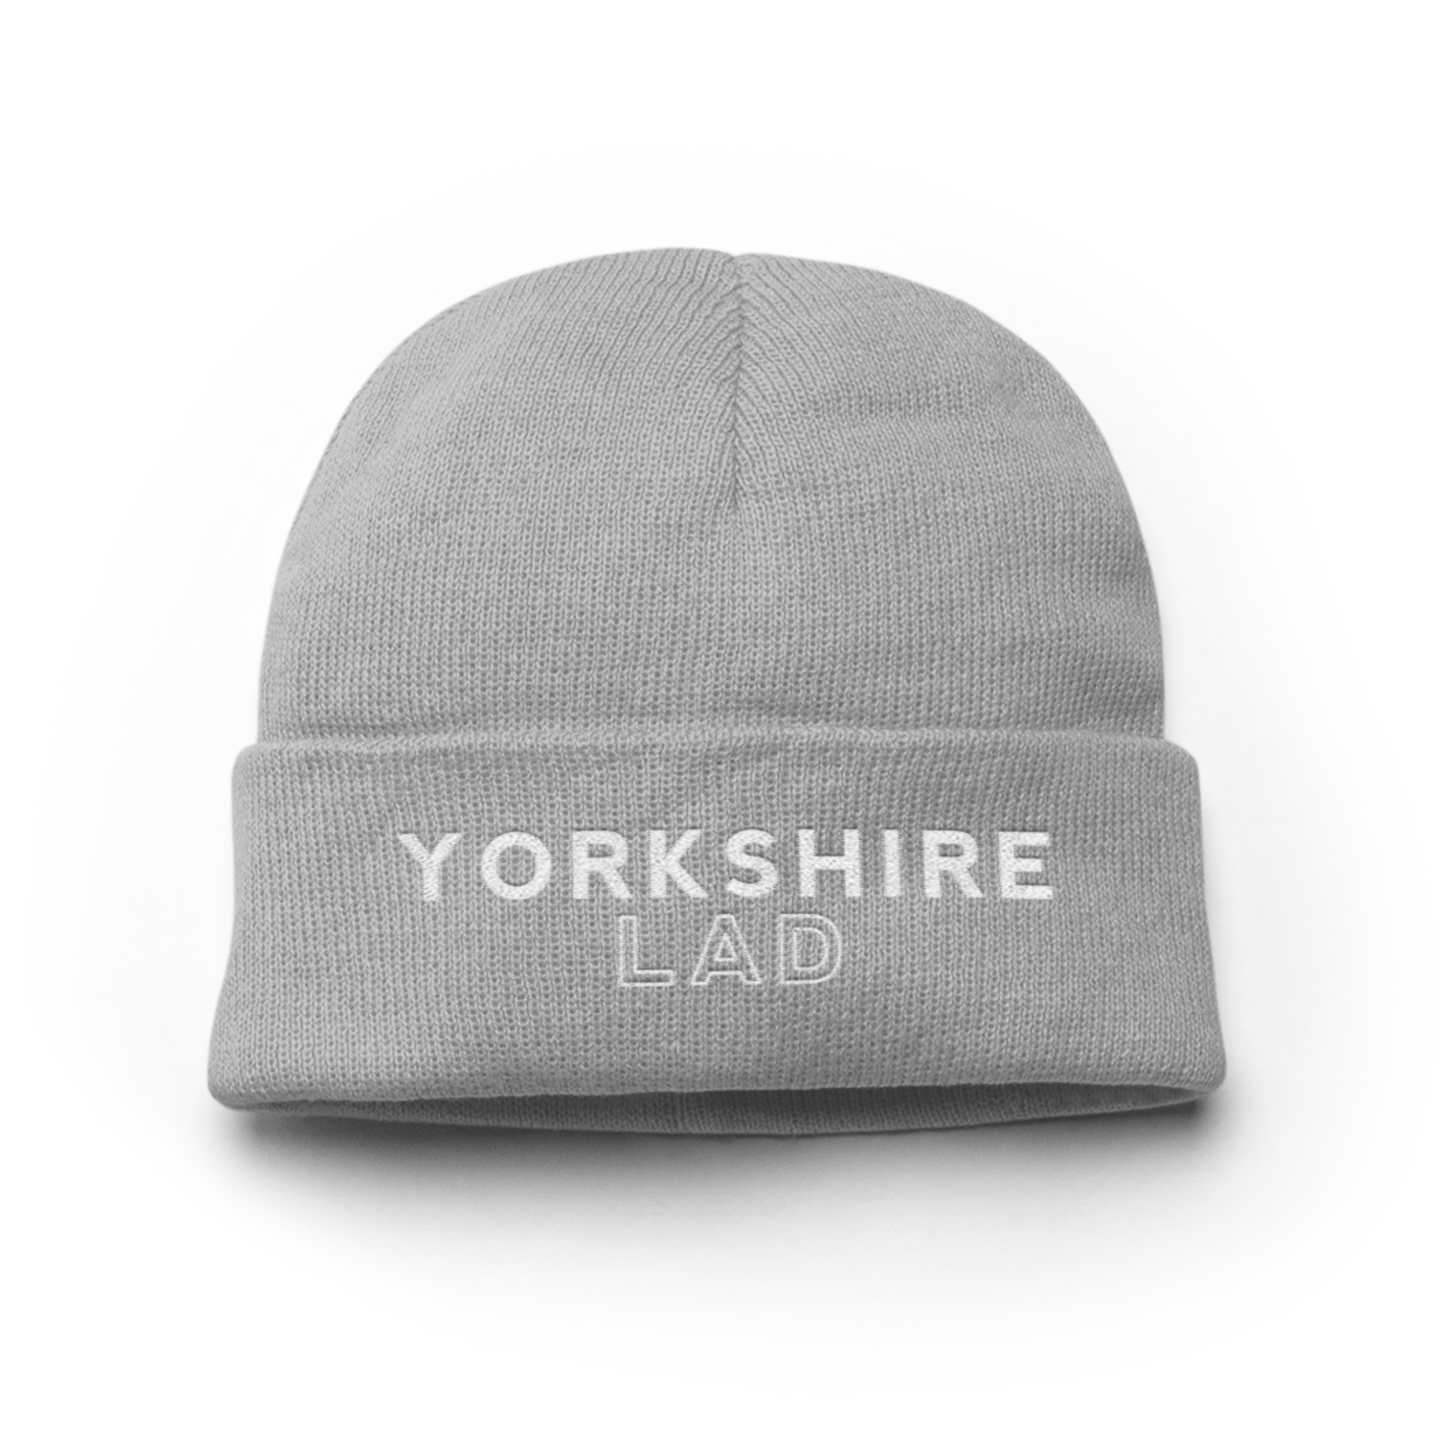 Yorkshire Lad Beanie Hat - The Great Yorkshire Shop